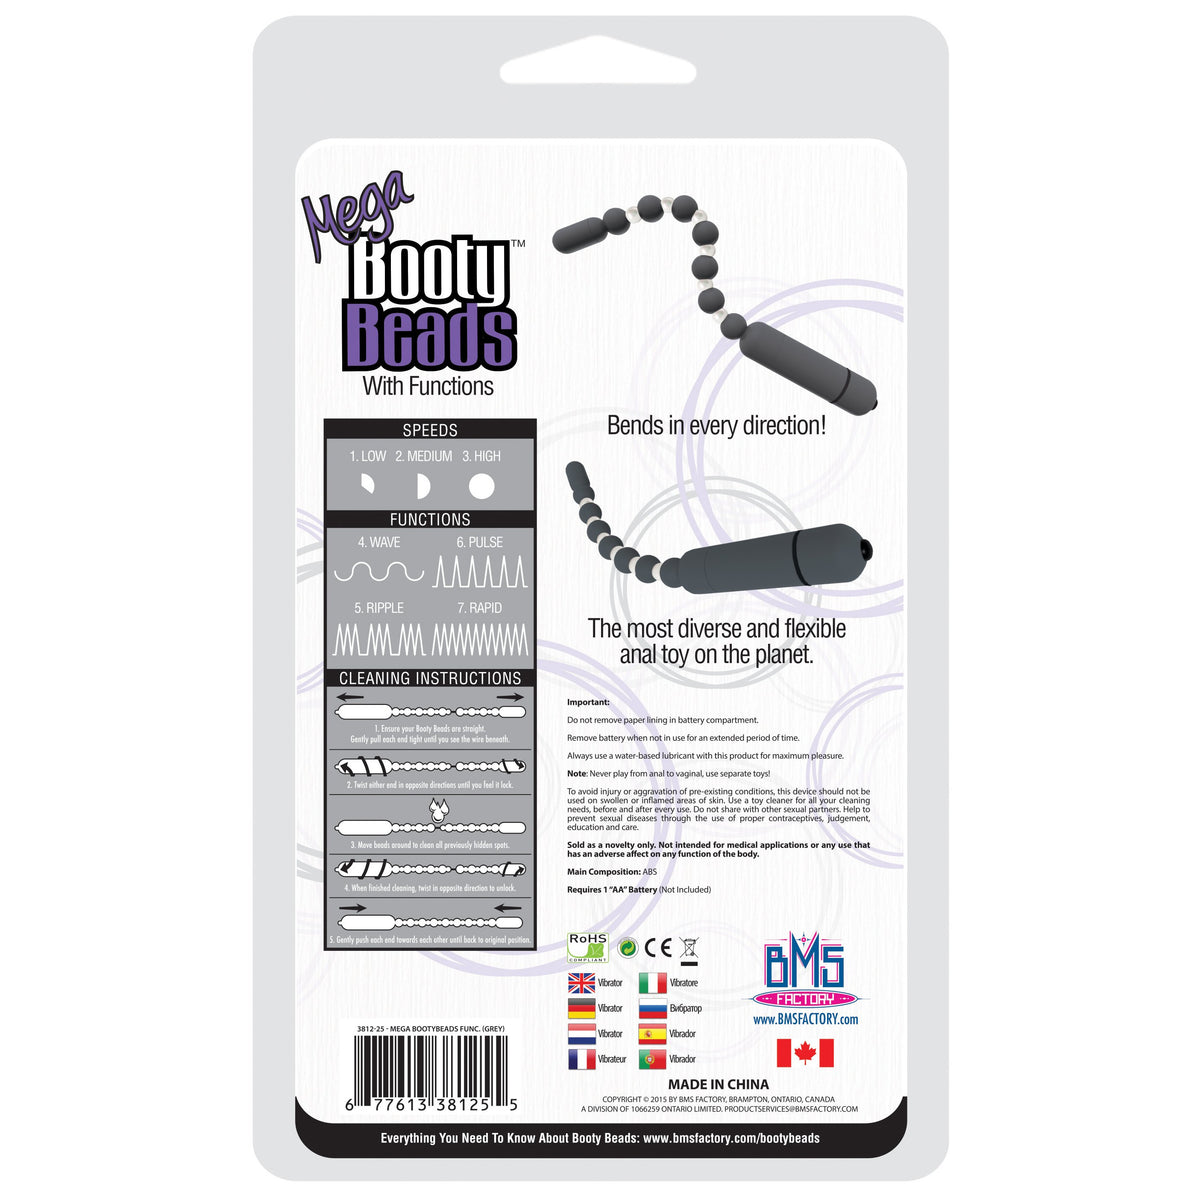 Power Bullet Mega Booty Beads with 7 Functions - Grey - Thorn & Feather Sex Toy Canada